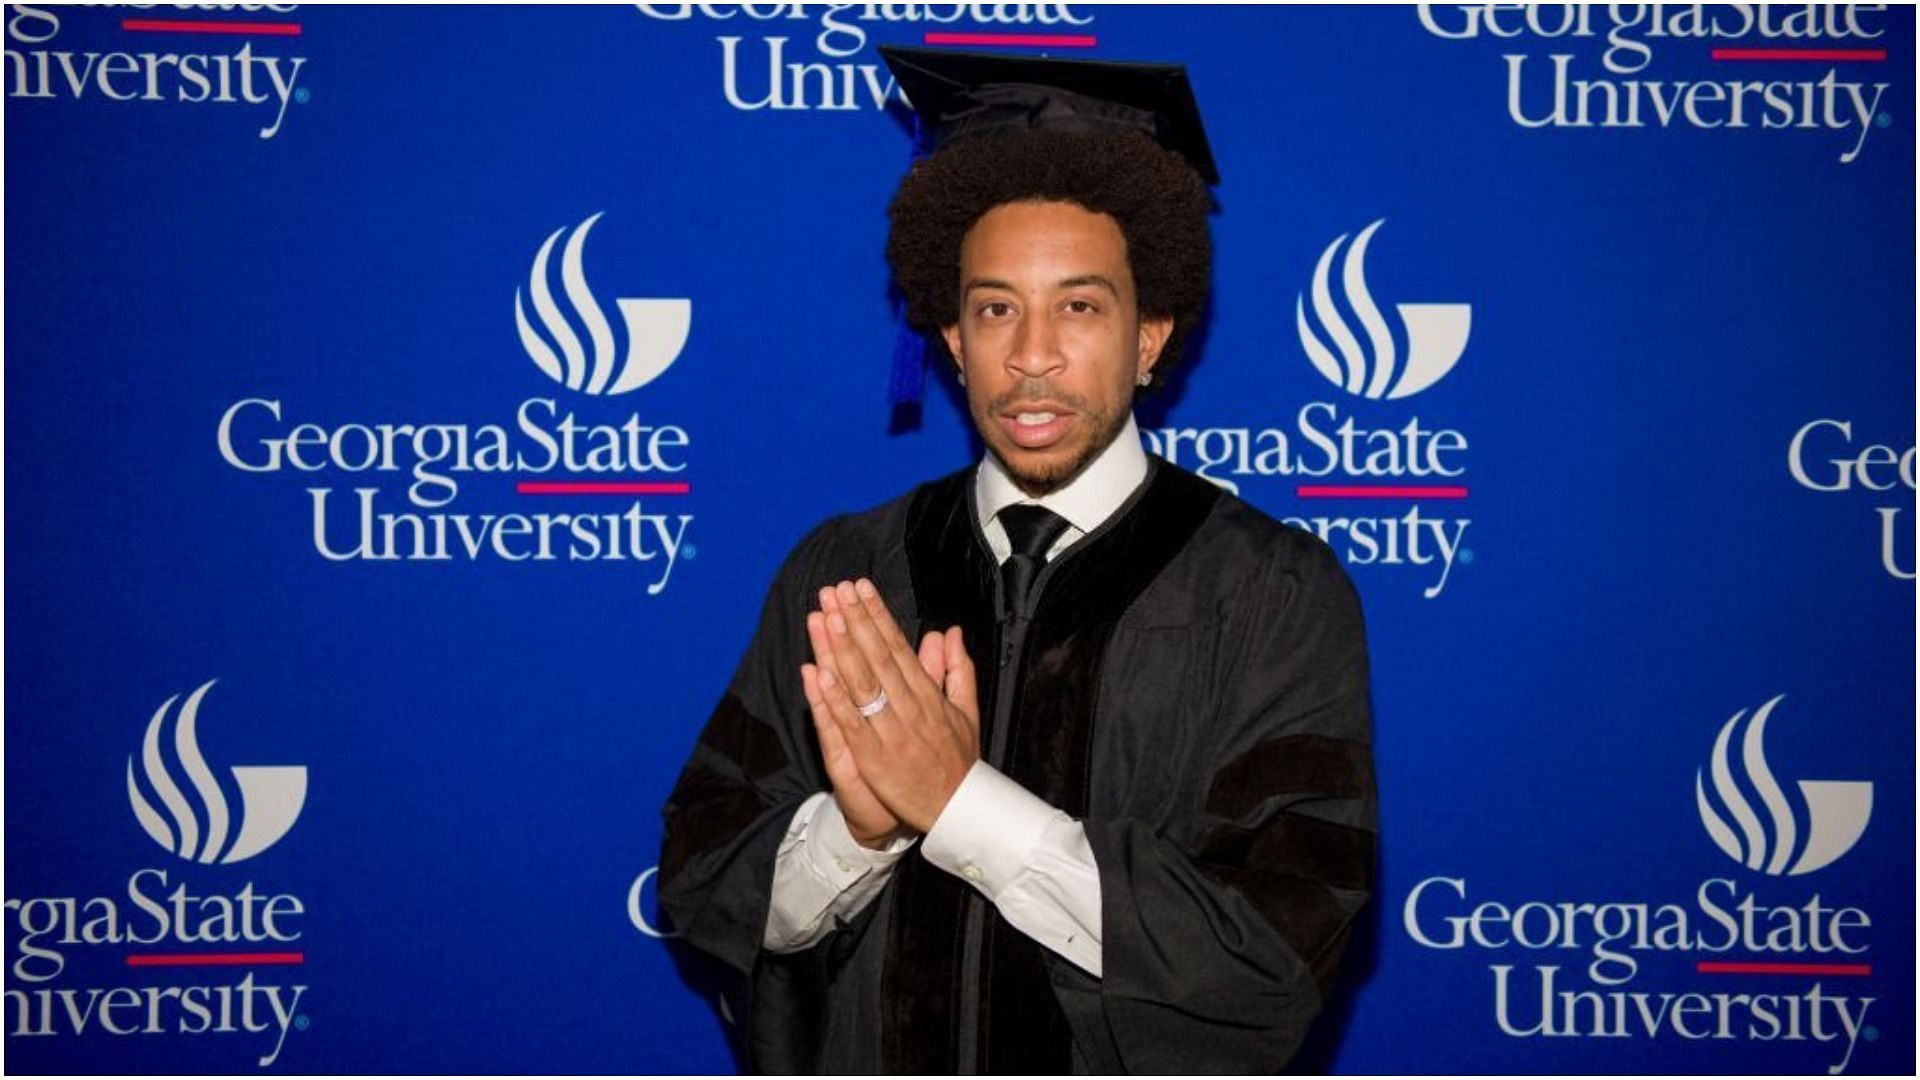 Ludacris received his honorary degree from the Georgia State University (Image via Derek White/Getty Images)